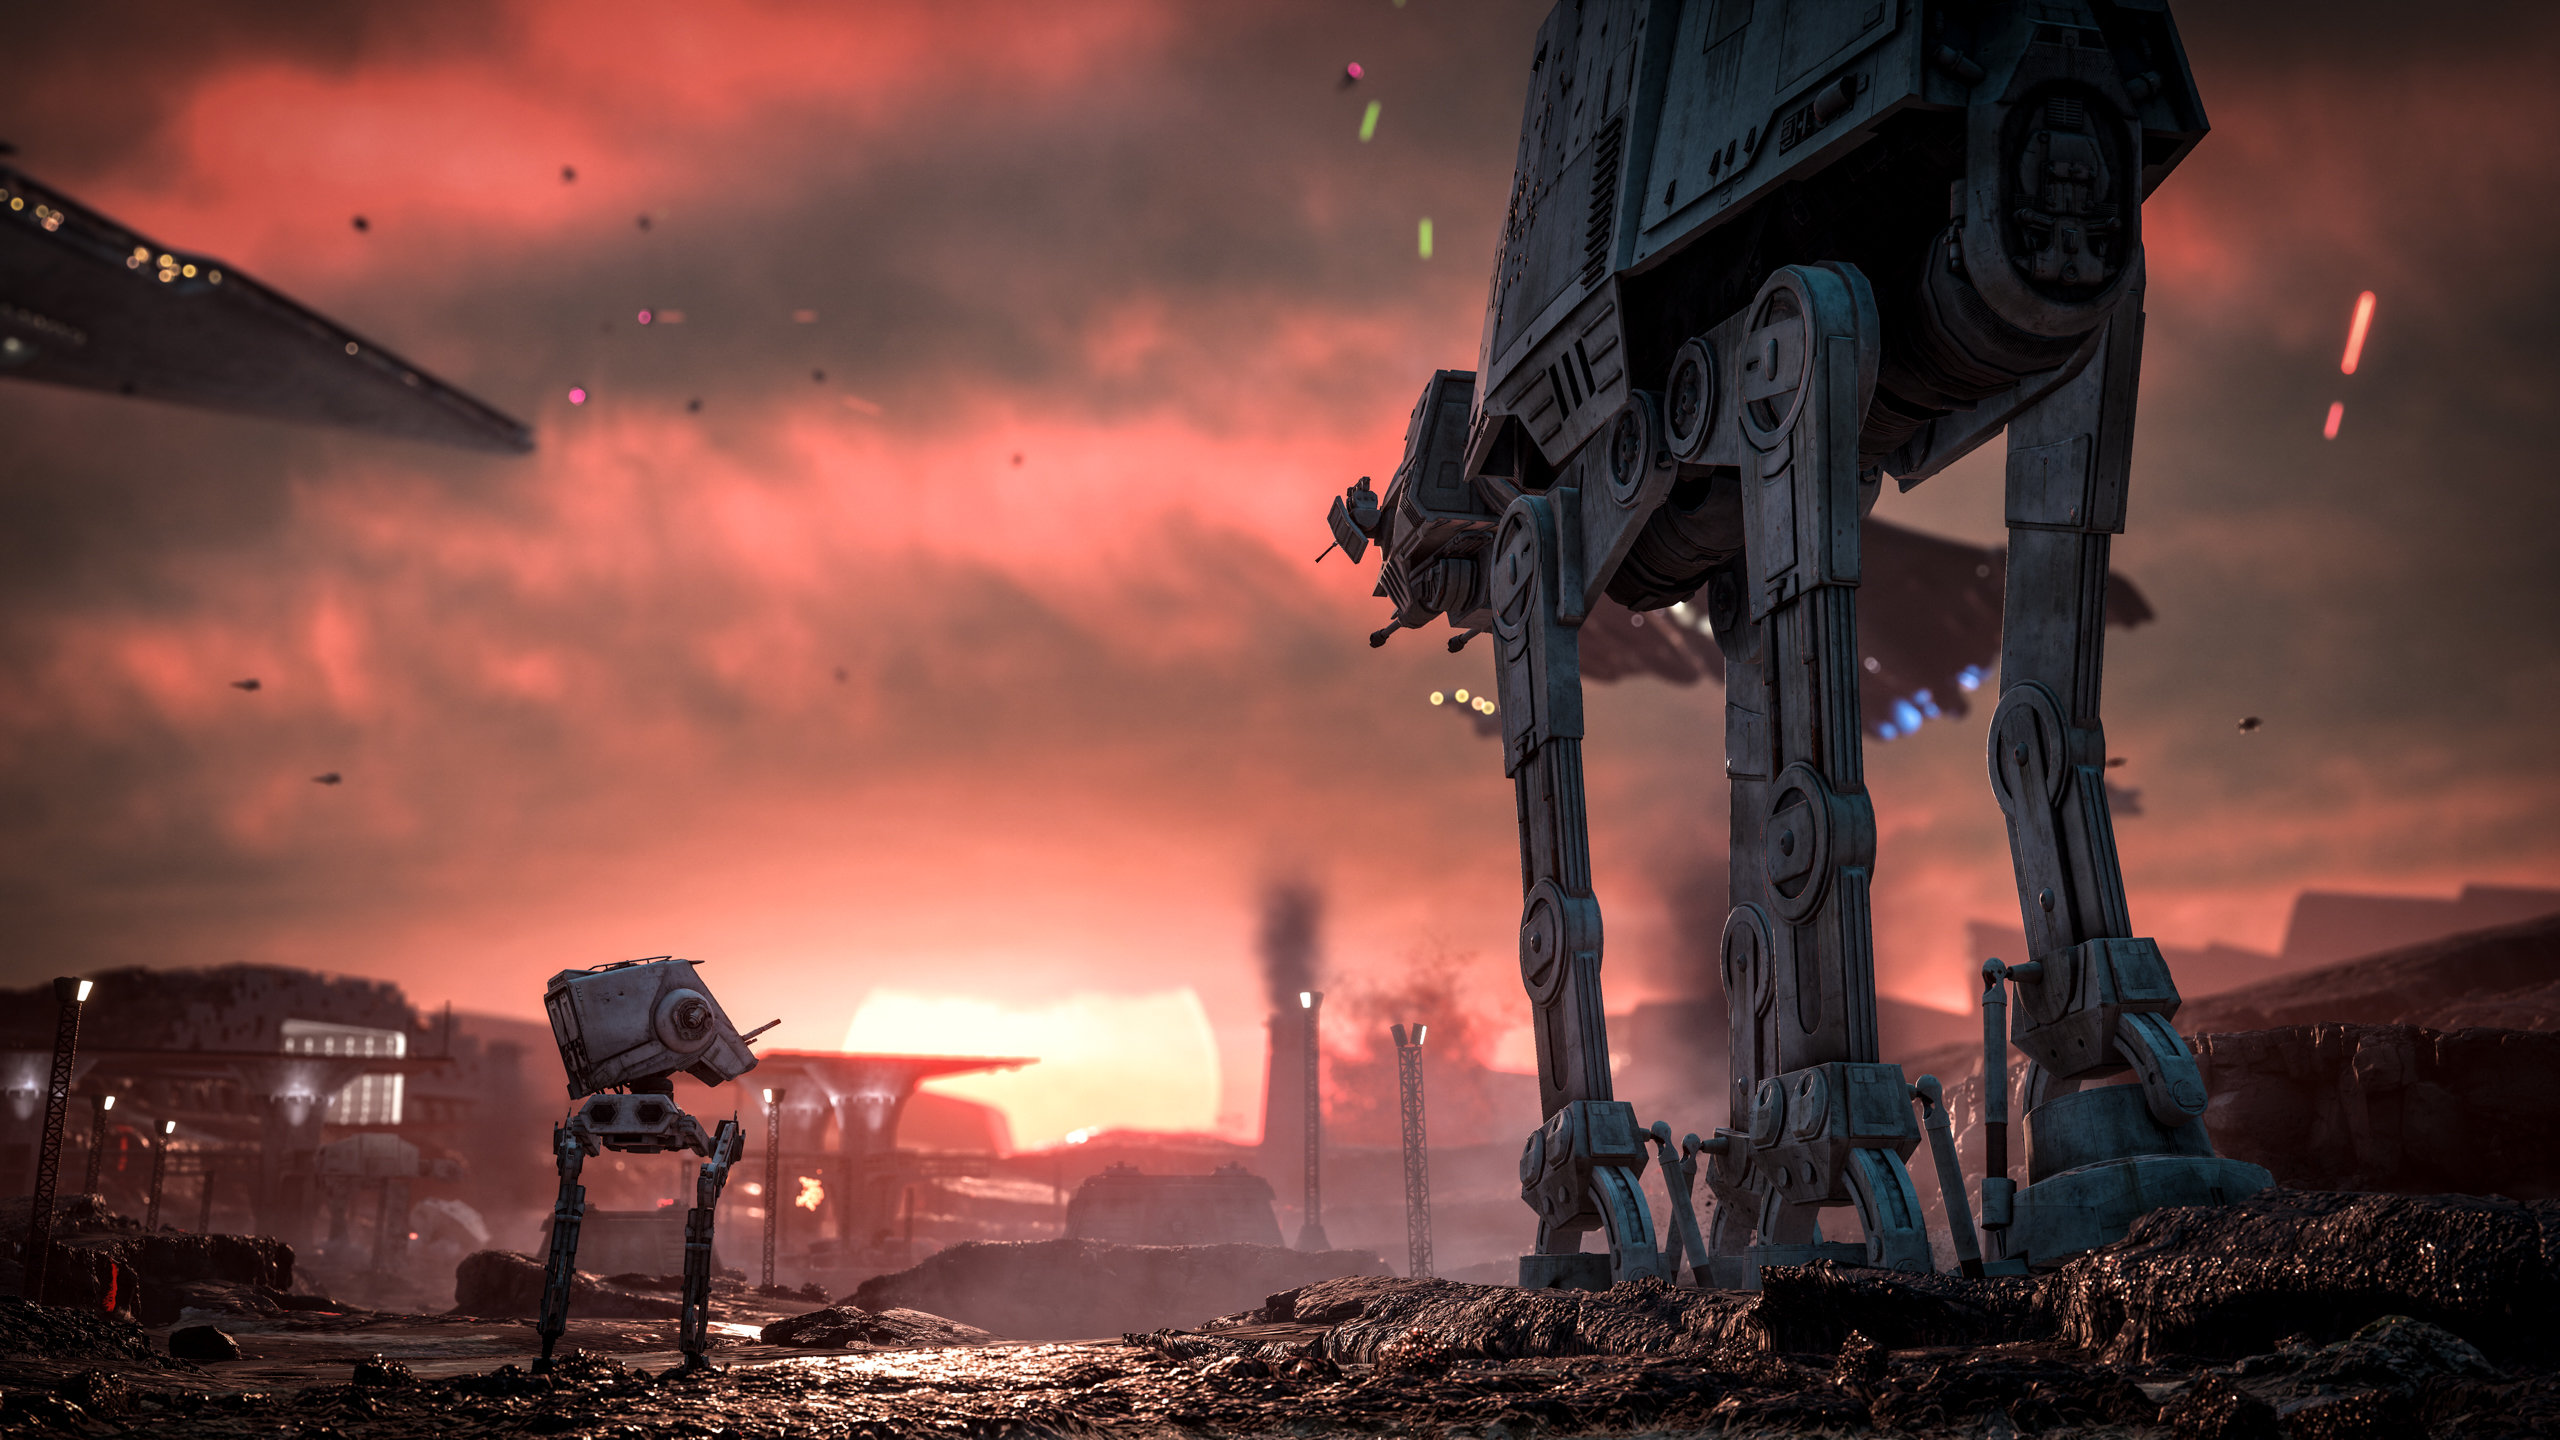 Download hd 2560x1440 Star Wars Battlefront computer background ID:162478 for free